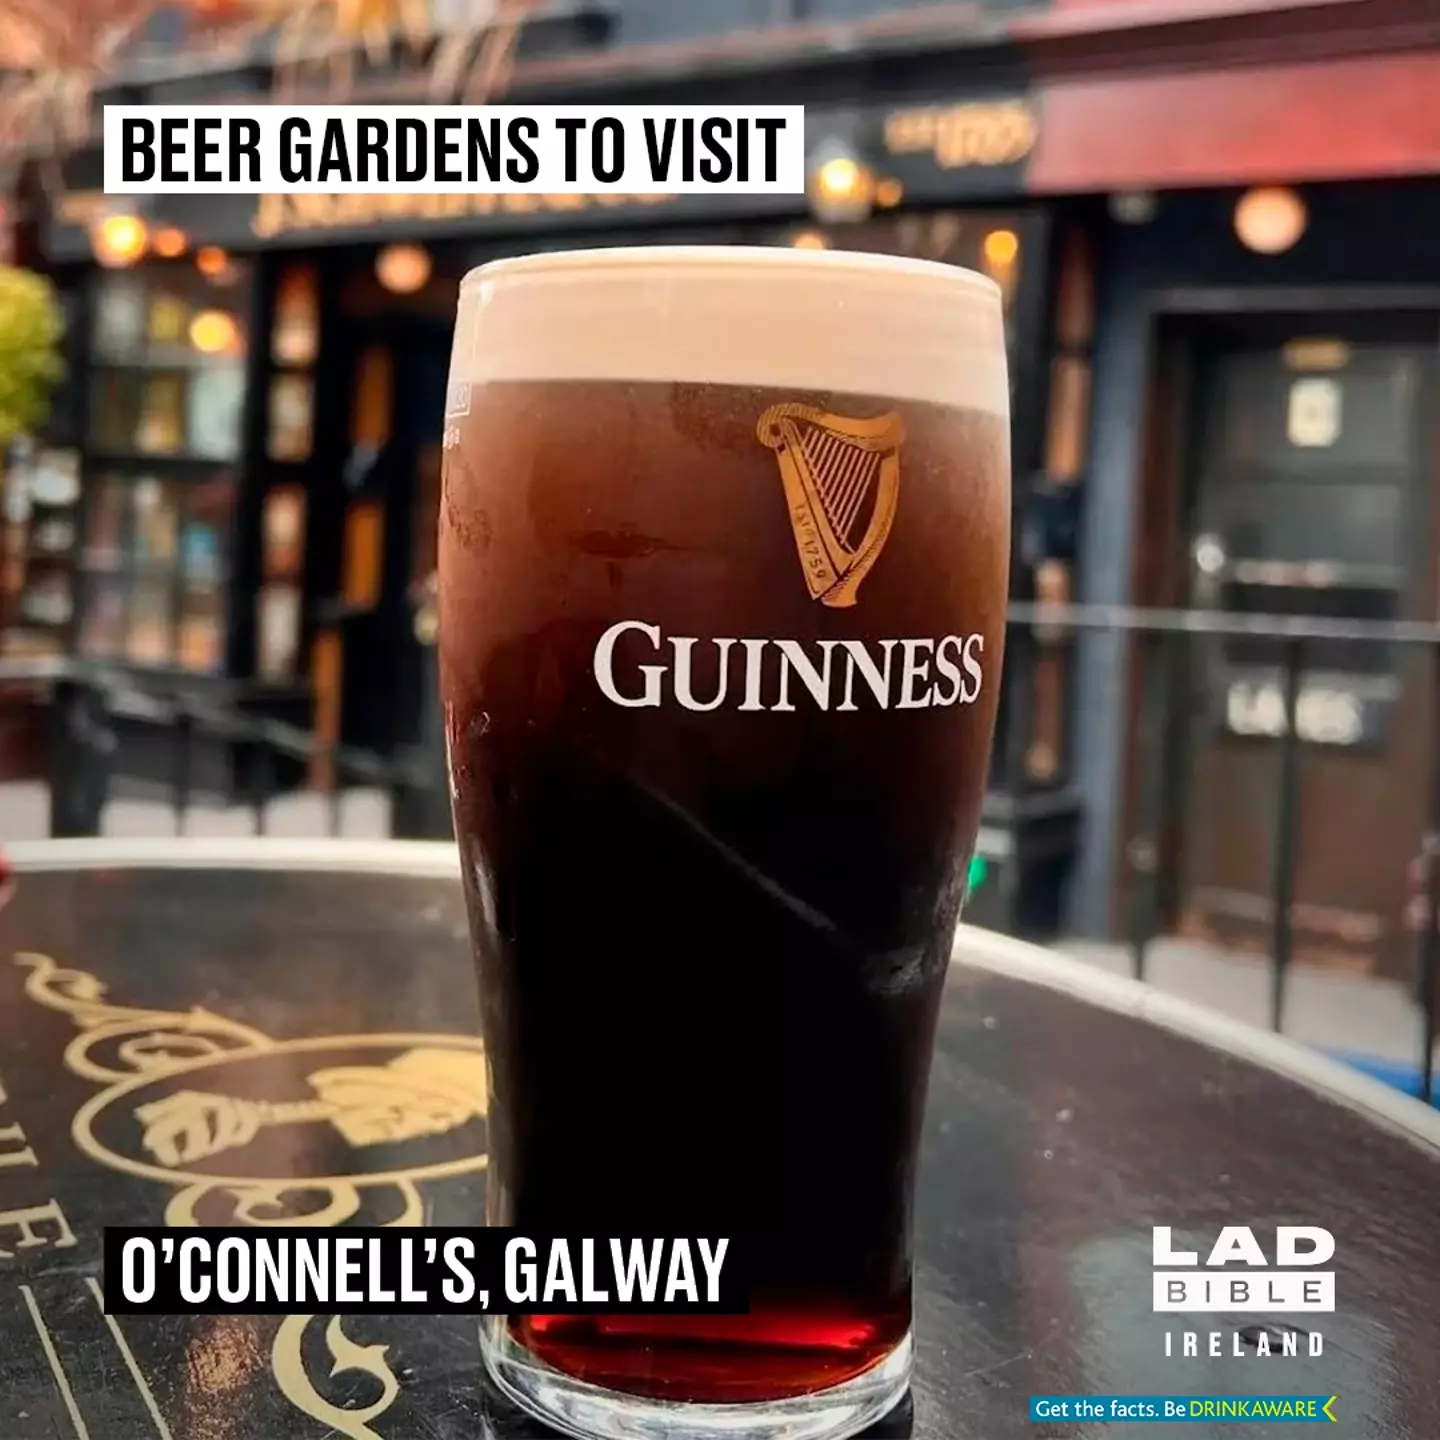 O'Connell's, Galway.